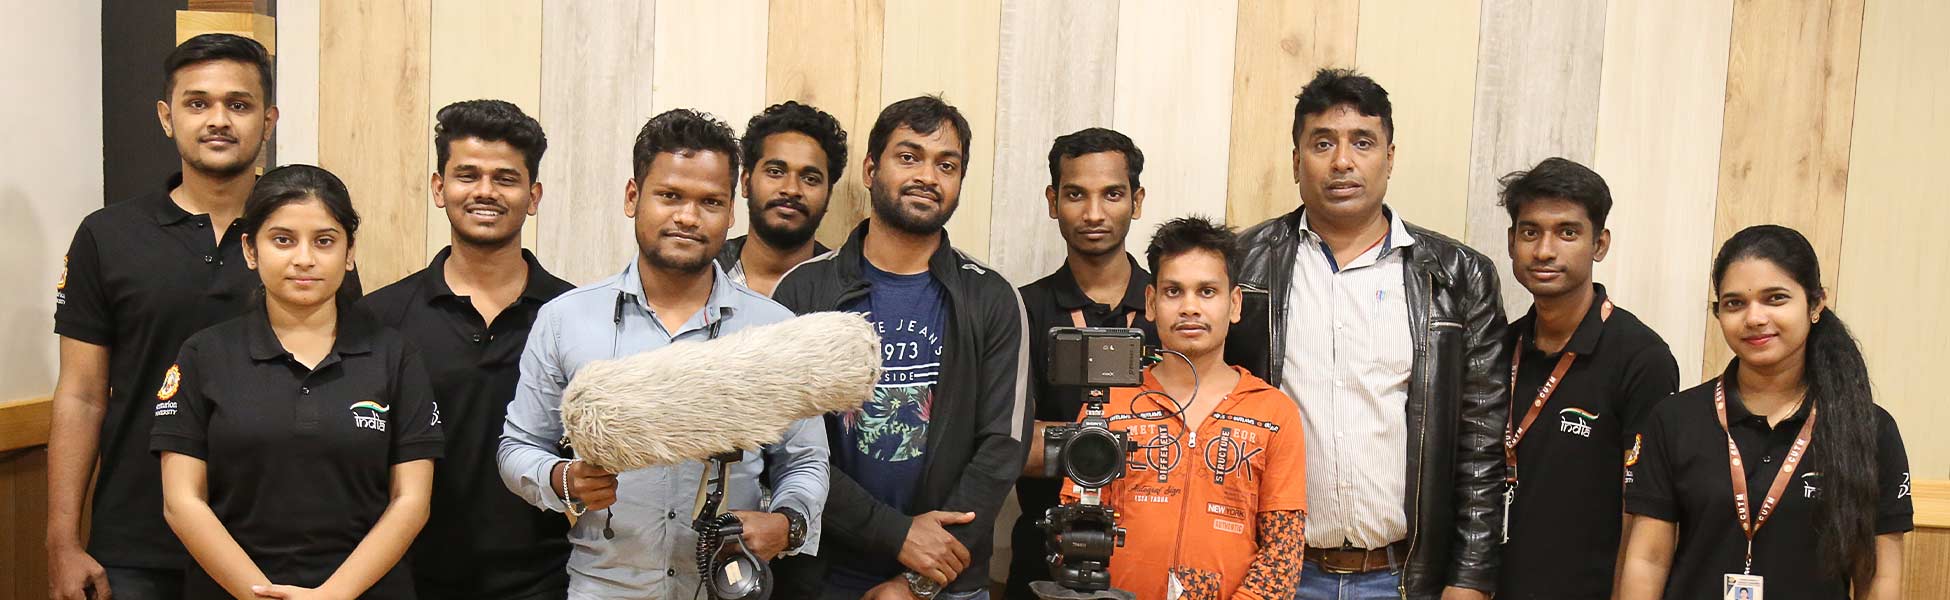 film shooting locations in india, video shooting locations in india, tv shooting locations in india, shooting locations in india